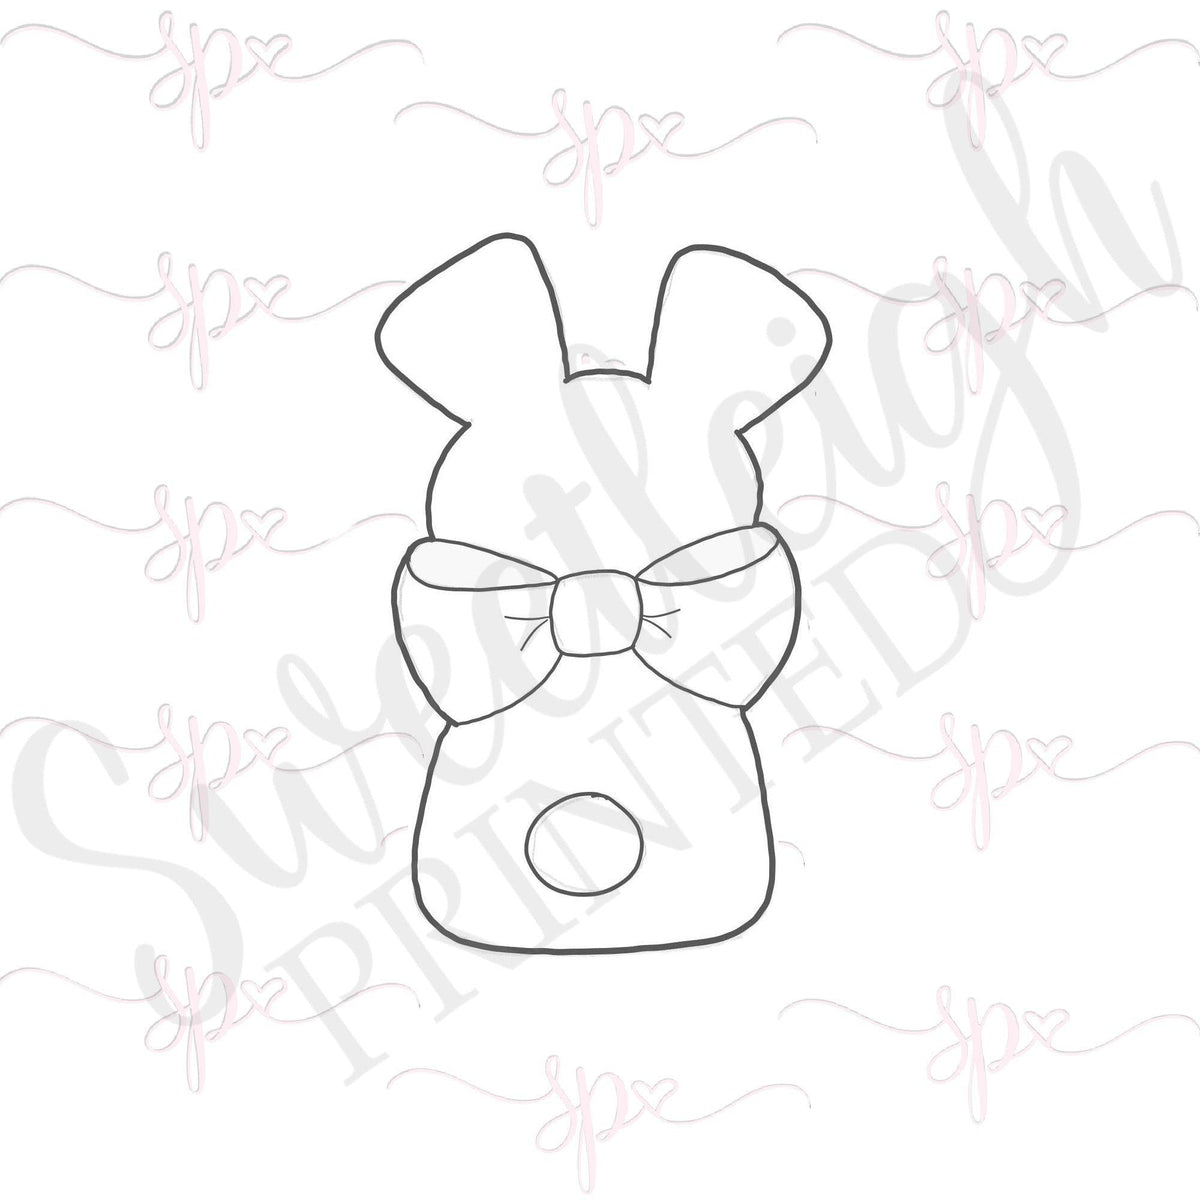 Bow Tie Bunny Cookie Cutter - Sweetleigh 